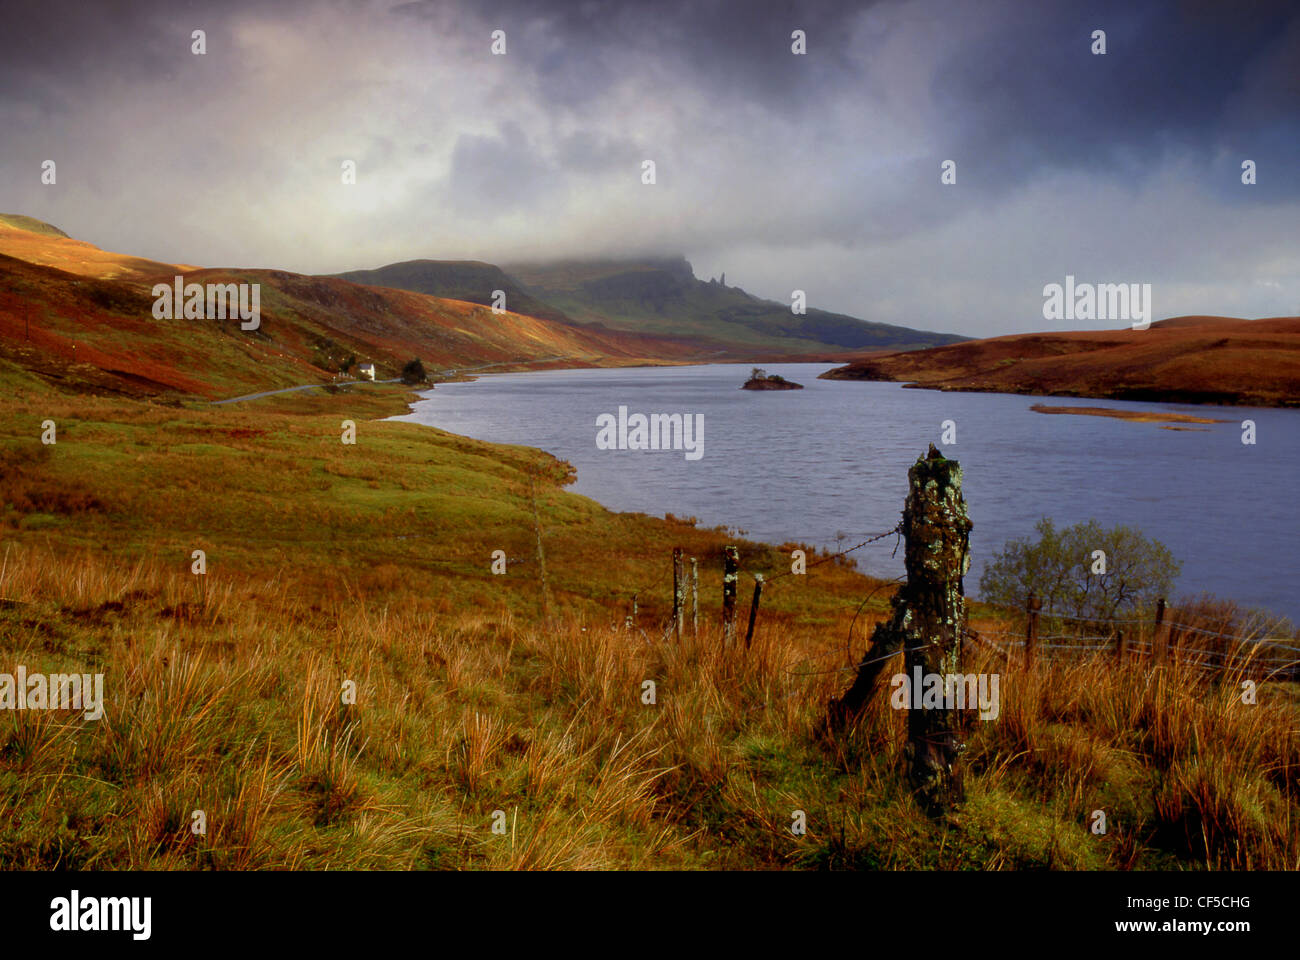 View of Loch Fada with a delapidated fence in the foreground. Stock Photo